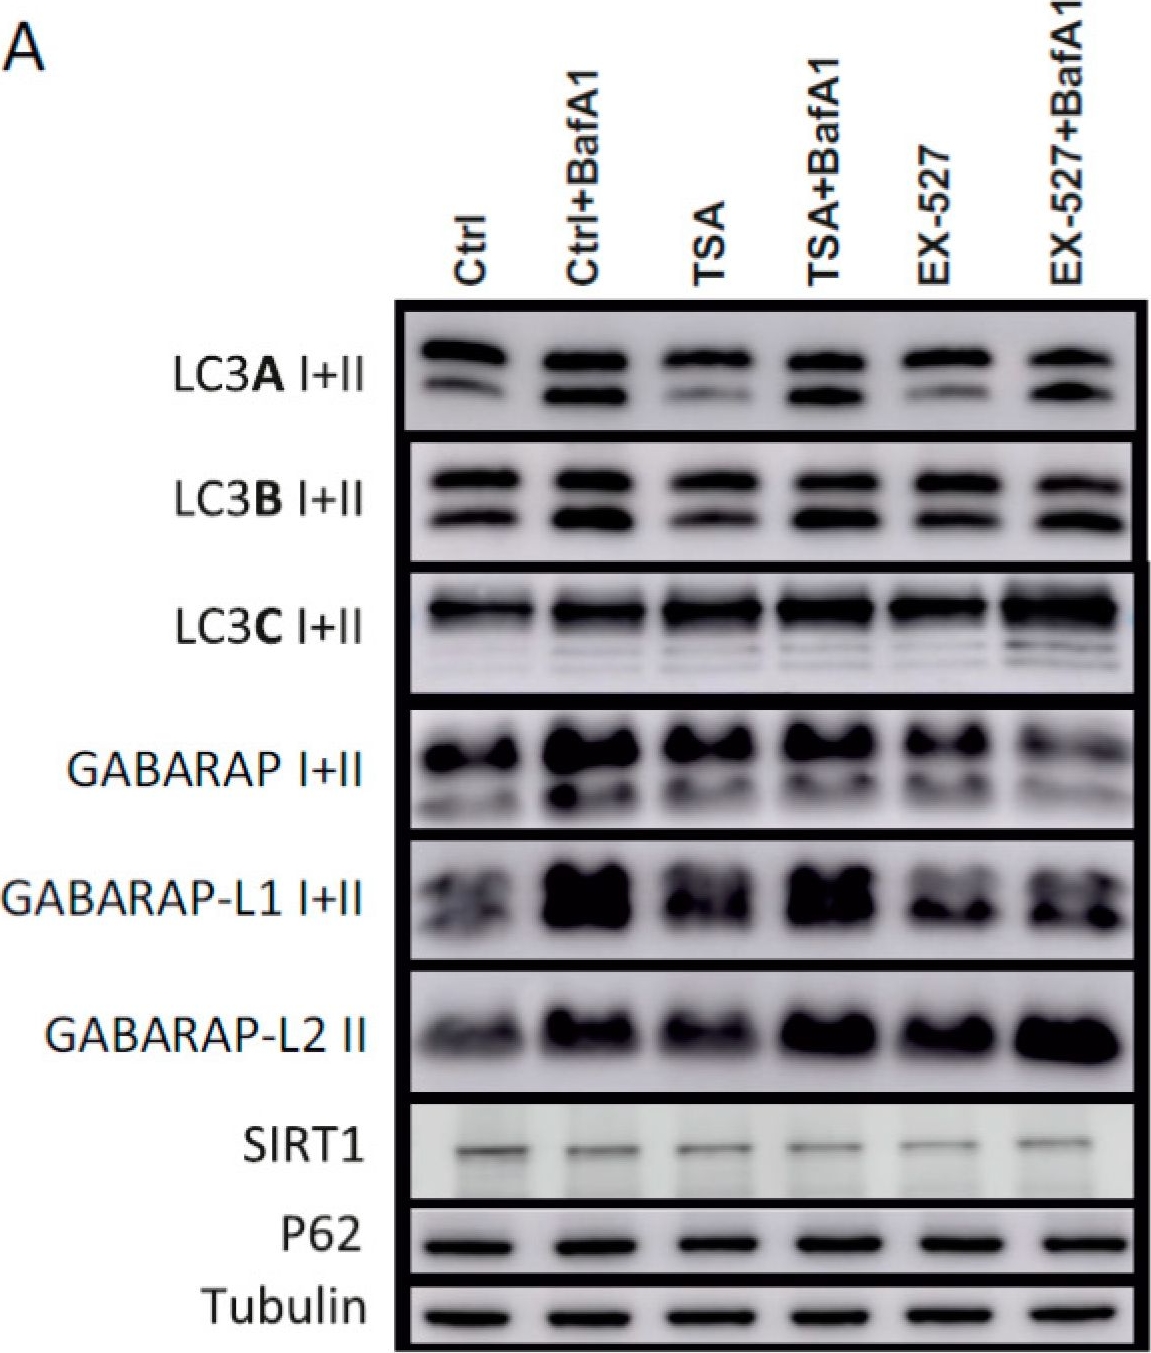 Novel Insights into the Cellular Localization and Regulation of the Autophagosomal Proteins LC3A, LC3B and LC3C.